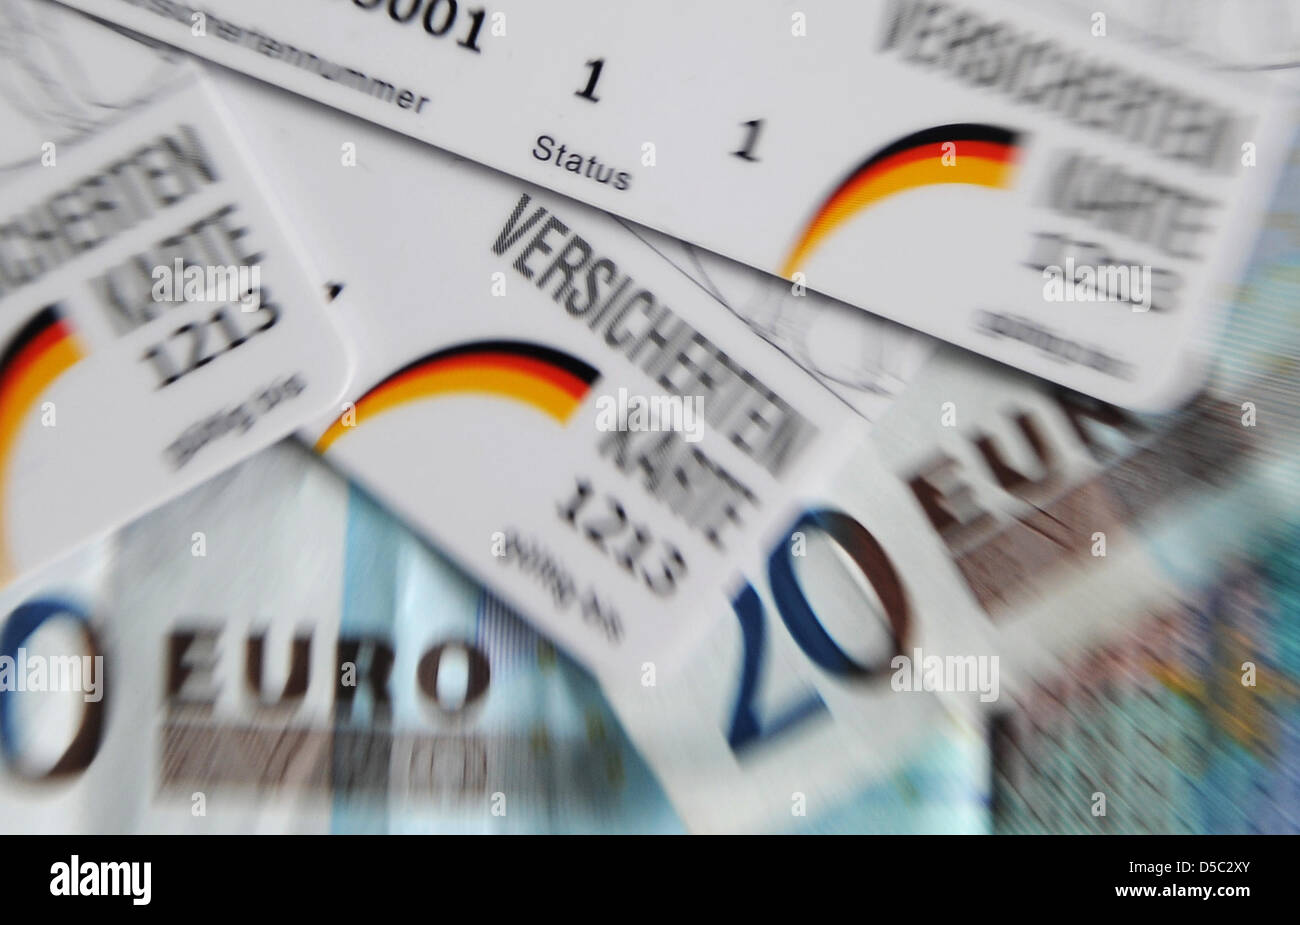 Health insurance cards lie on a table in Duesseldorf, Germany, 27 January 2010. Some statutory health insurances plan to collect additional contributions of eight euros from their customers. Photo: Achim Scheidemann Stock Photo